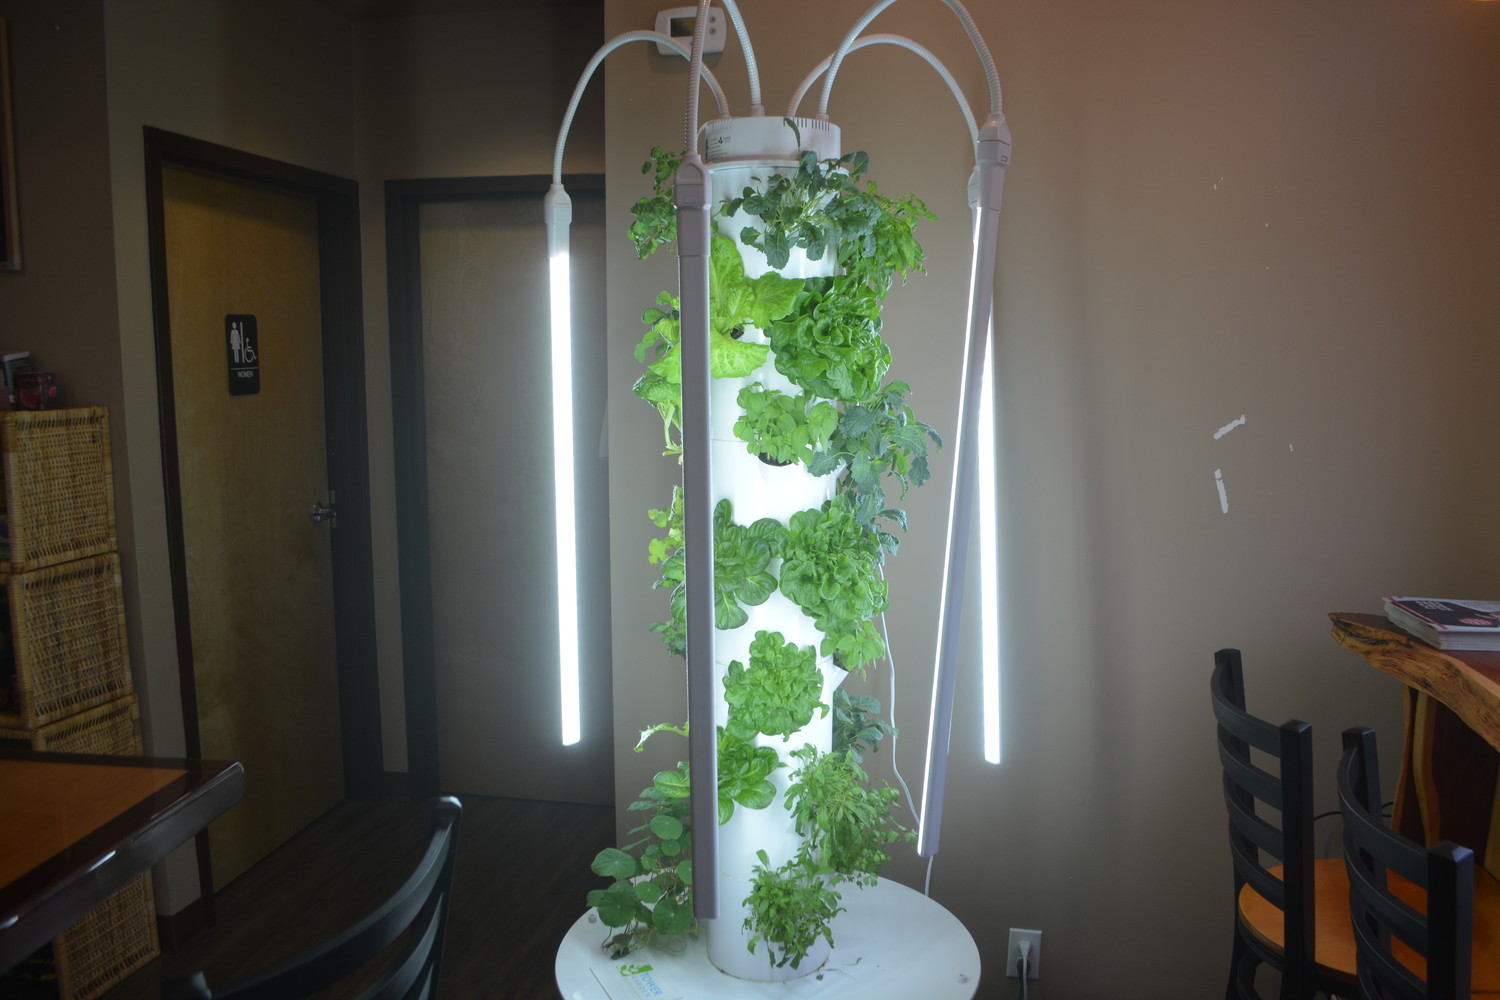 Plants are grown inside the restaurant using hydroponics.